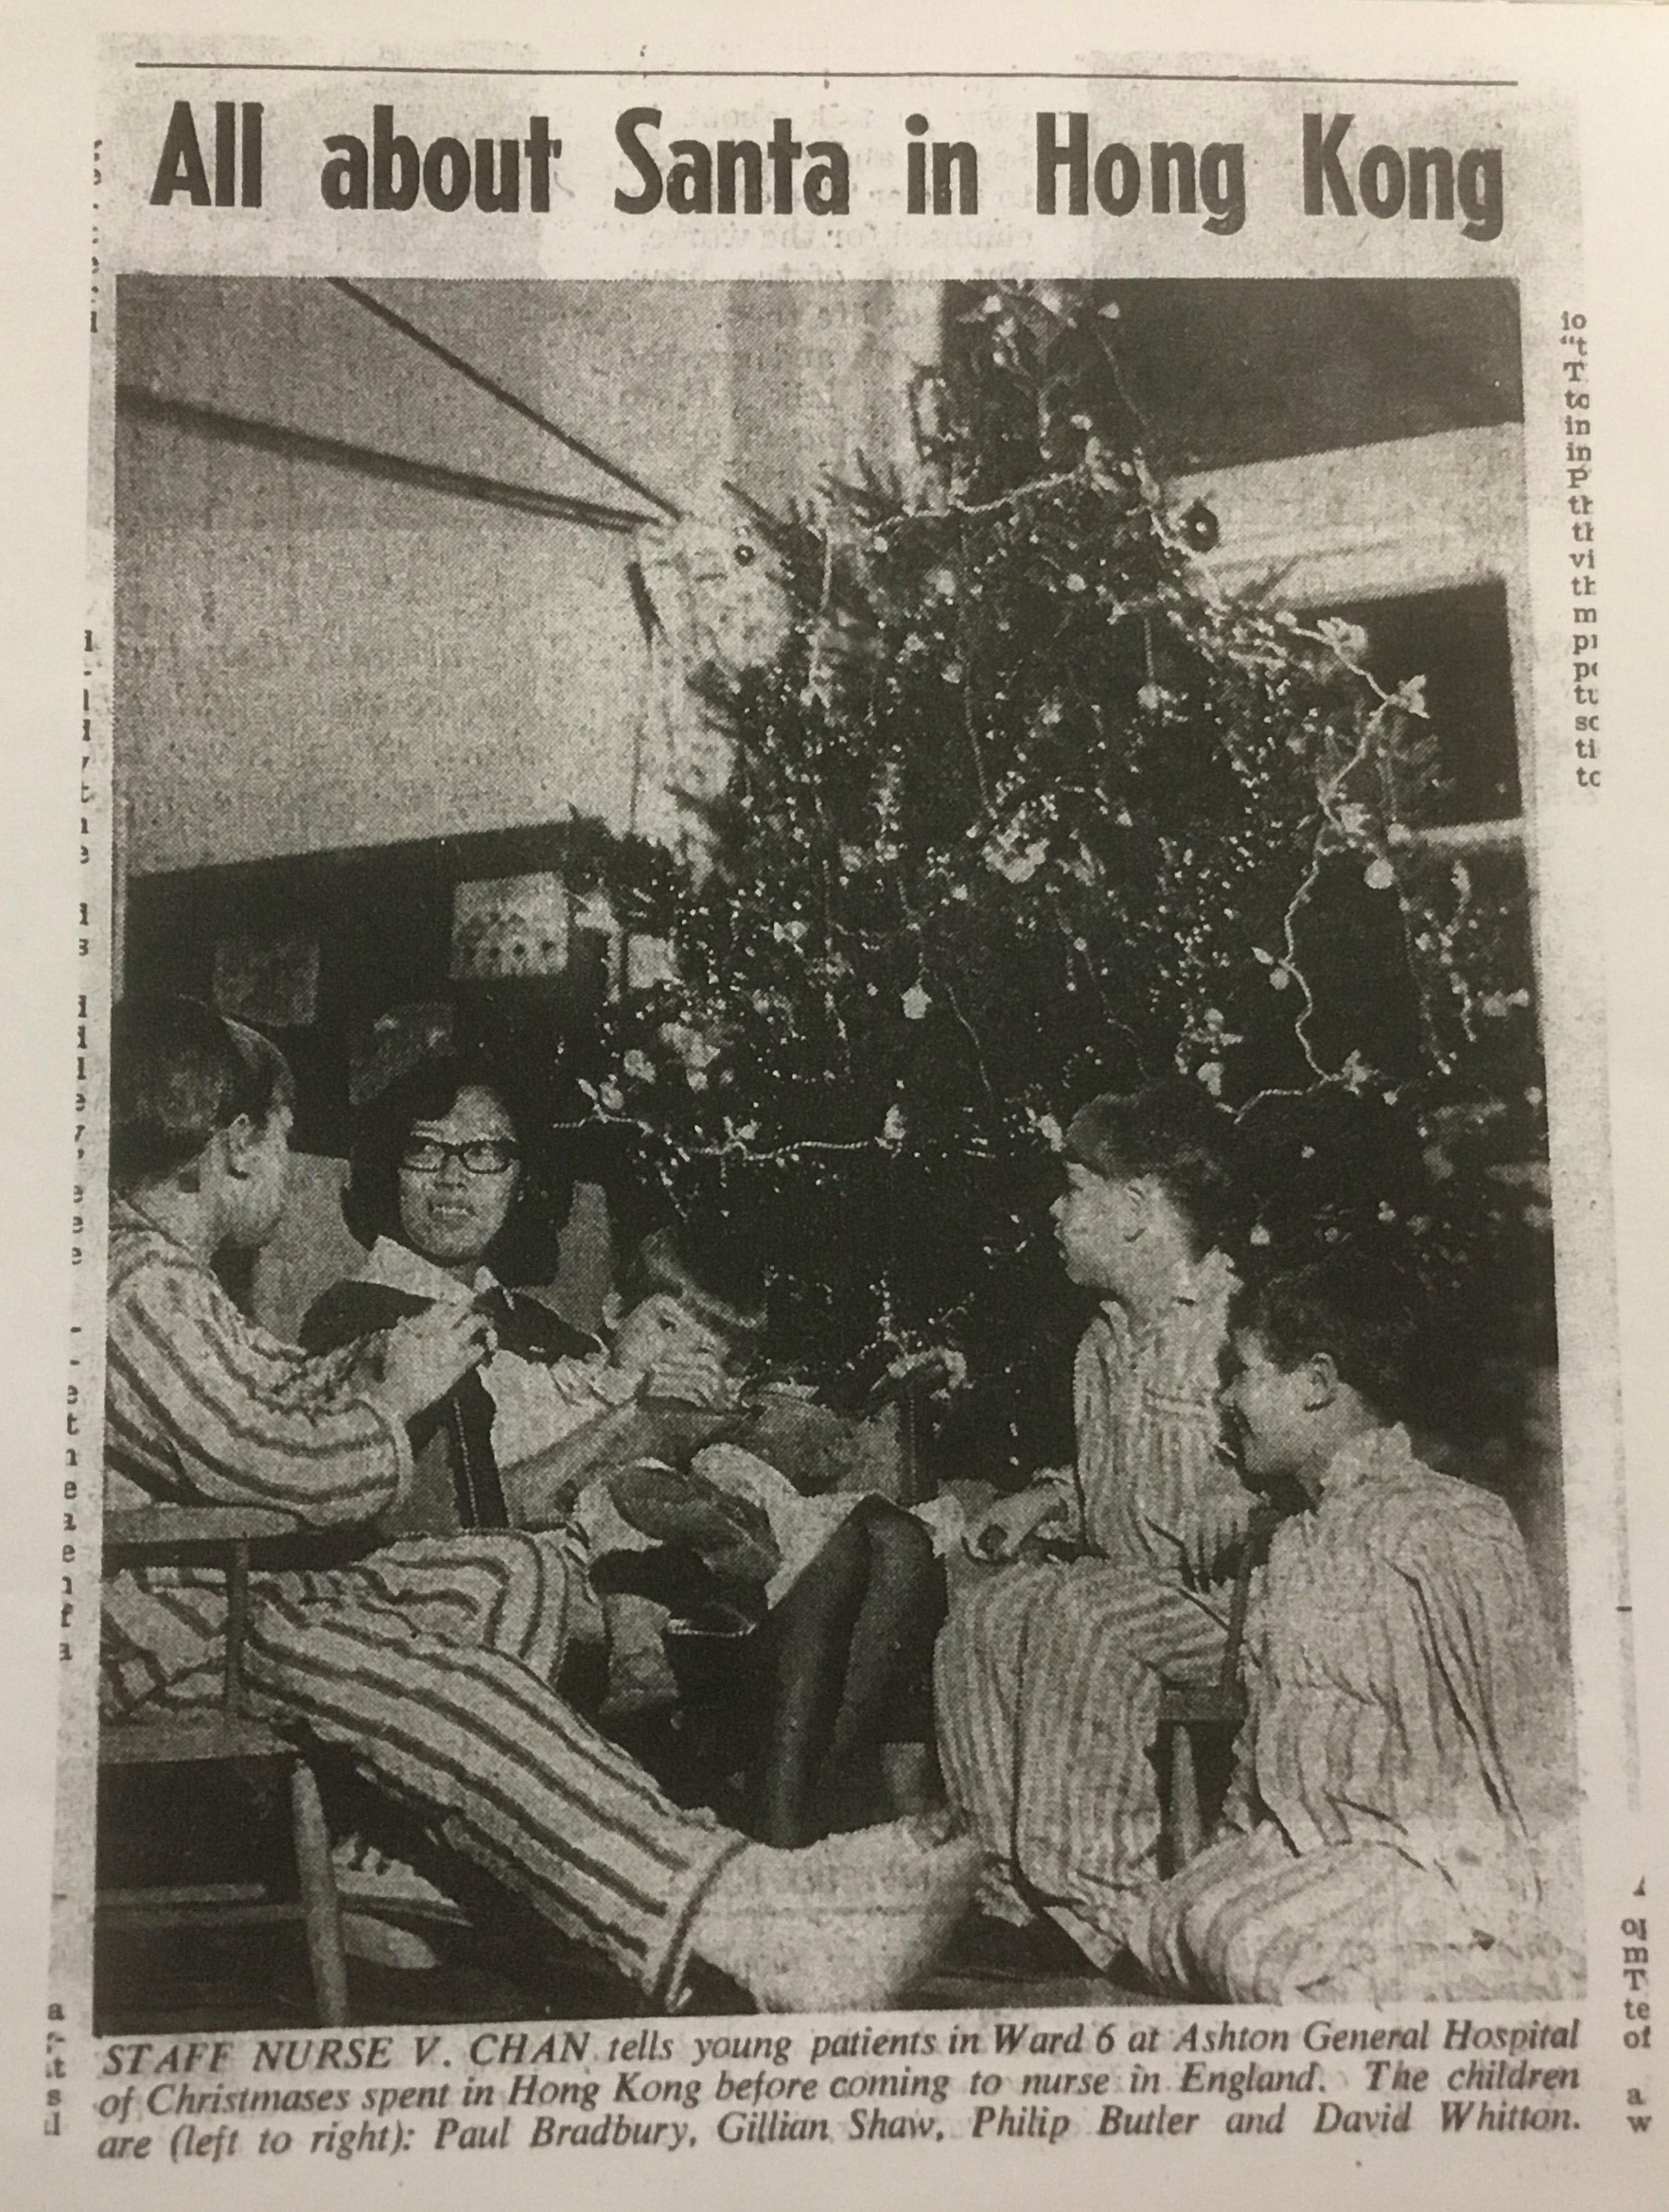 ‘I Wish It Could Be Christmas Every Day’: A Look at Christmas Traditions Through The Medium of the Local Press